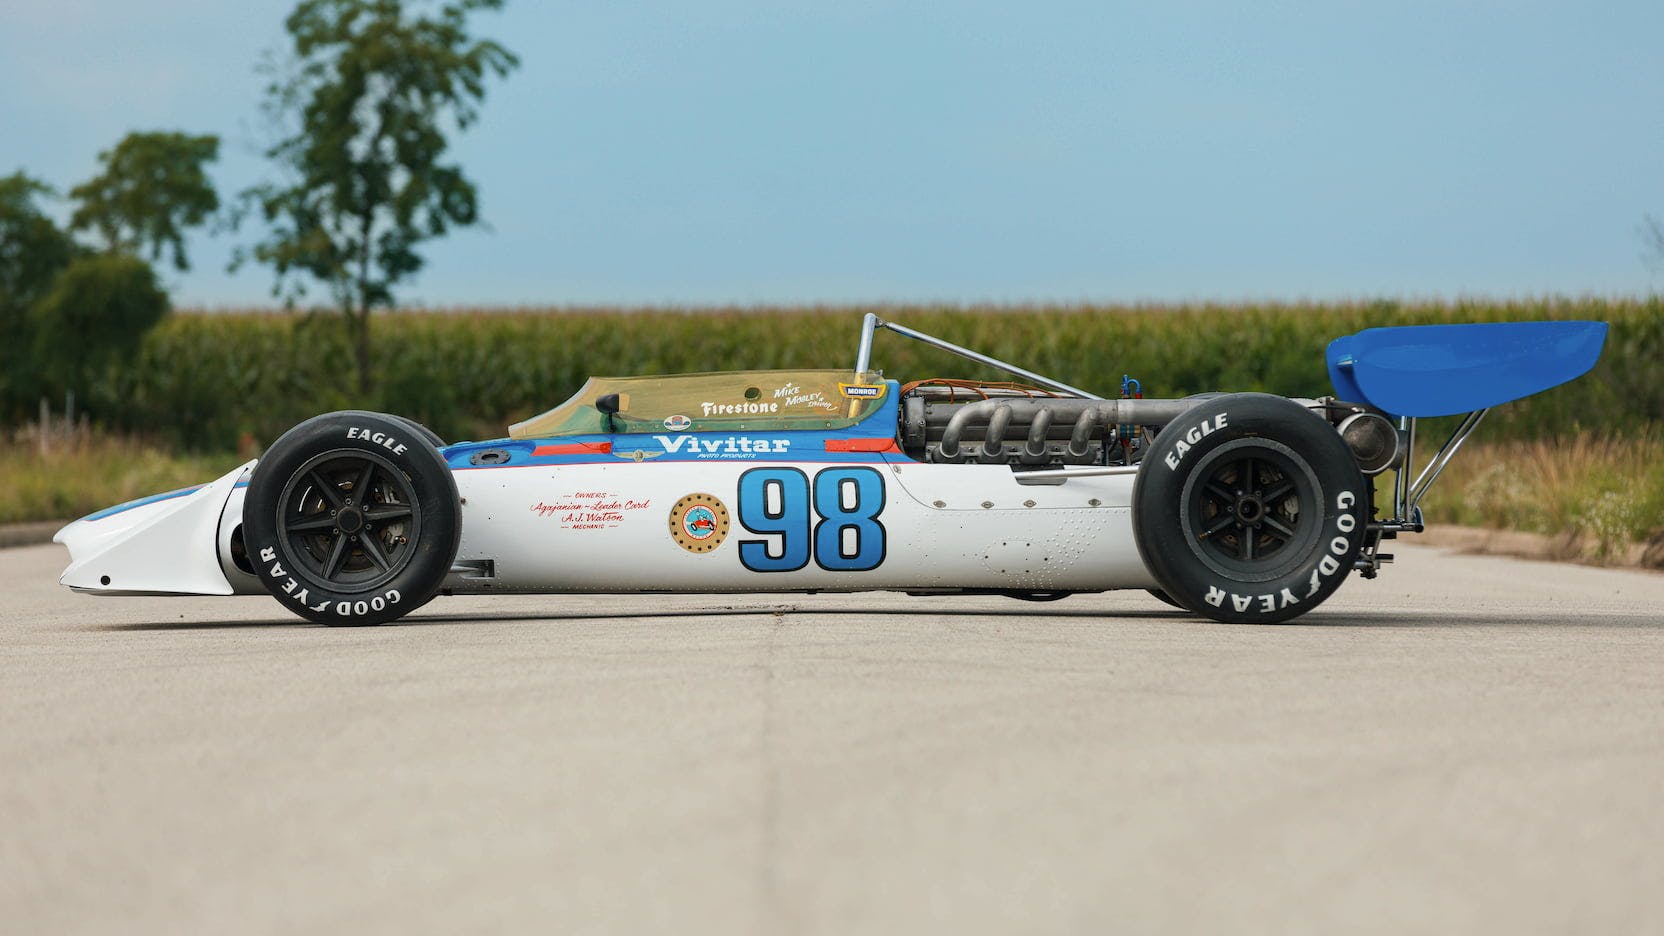 1968 Eagle Offenhauser Indy Car side